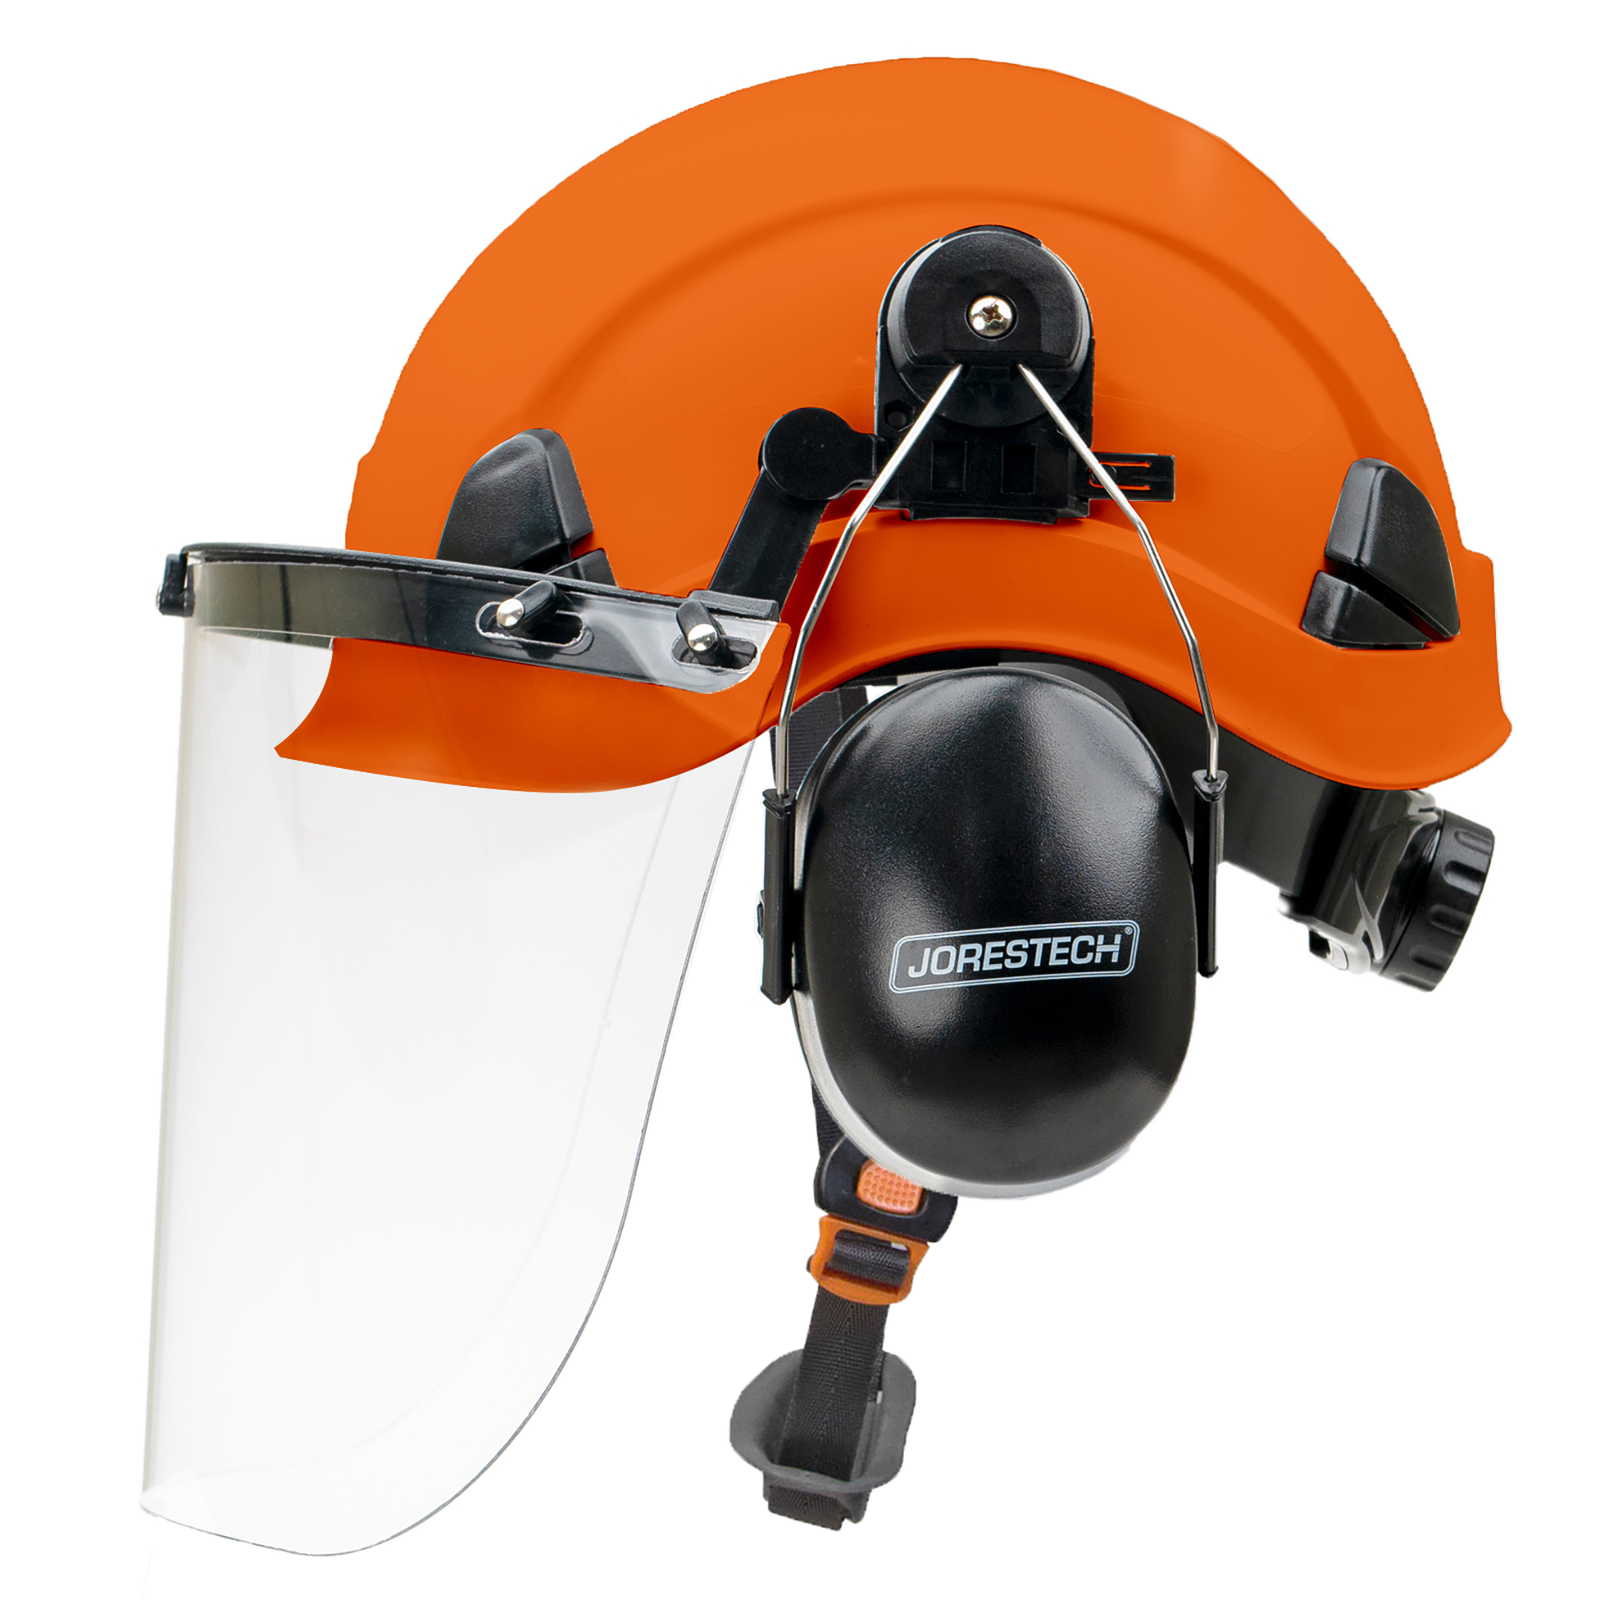 Side view of the Jorestech orange 3-in-1 helmet system with mountable face shield and earmuffs